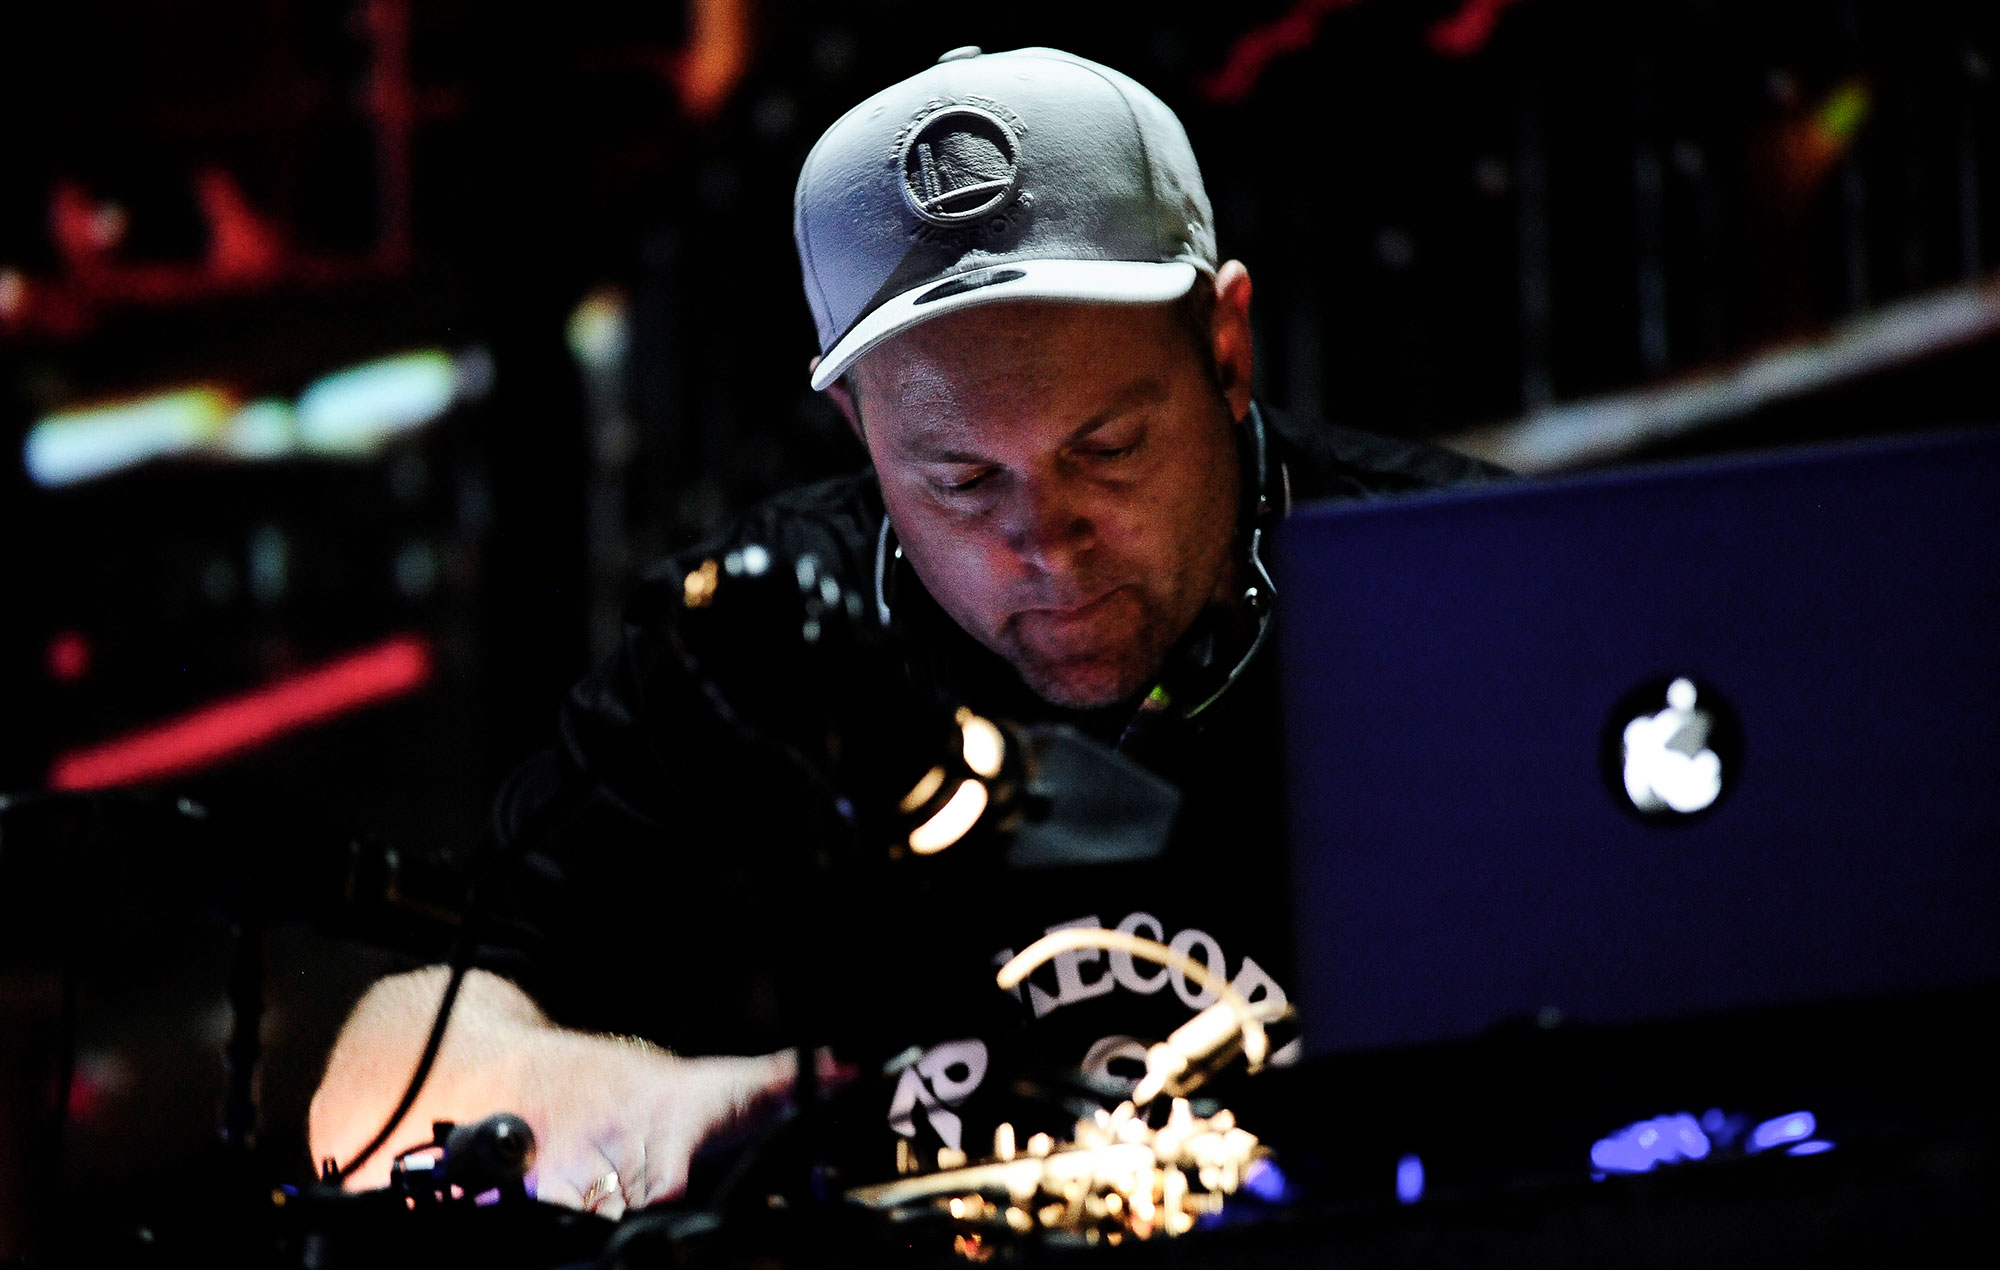 DJ Shadow announces first full tour in seven years, including UK dates